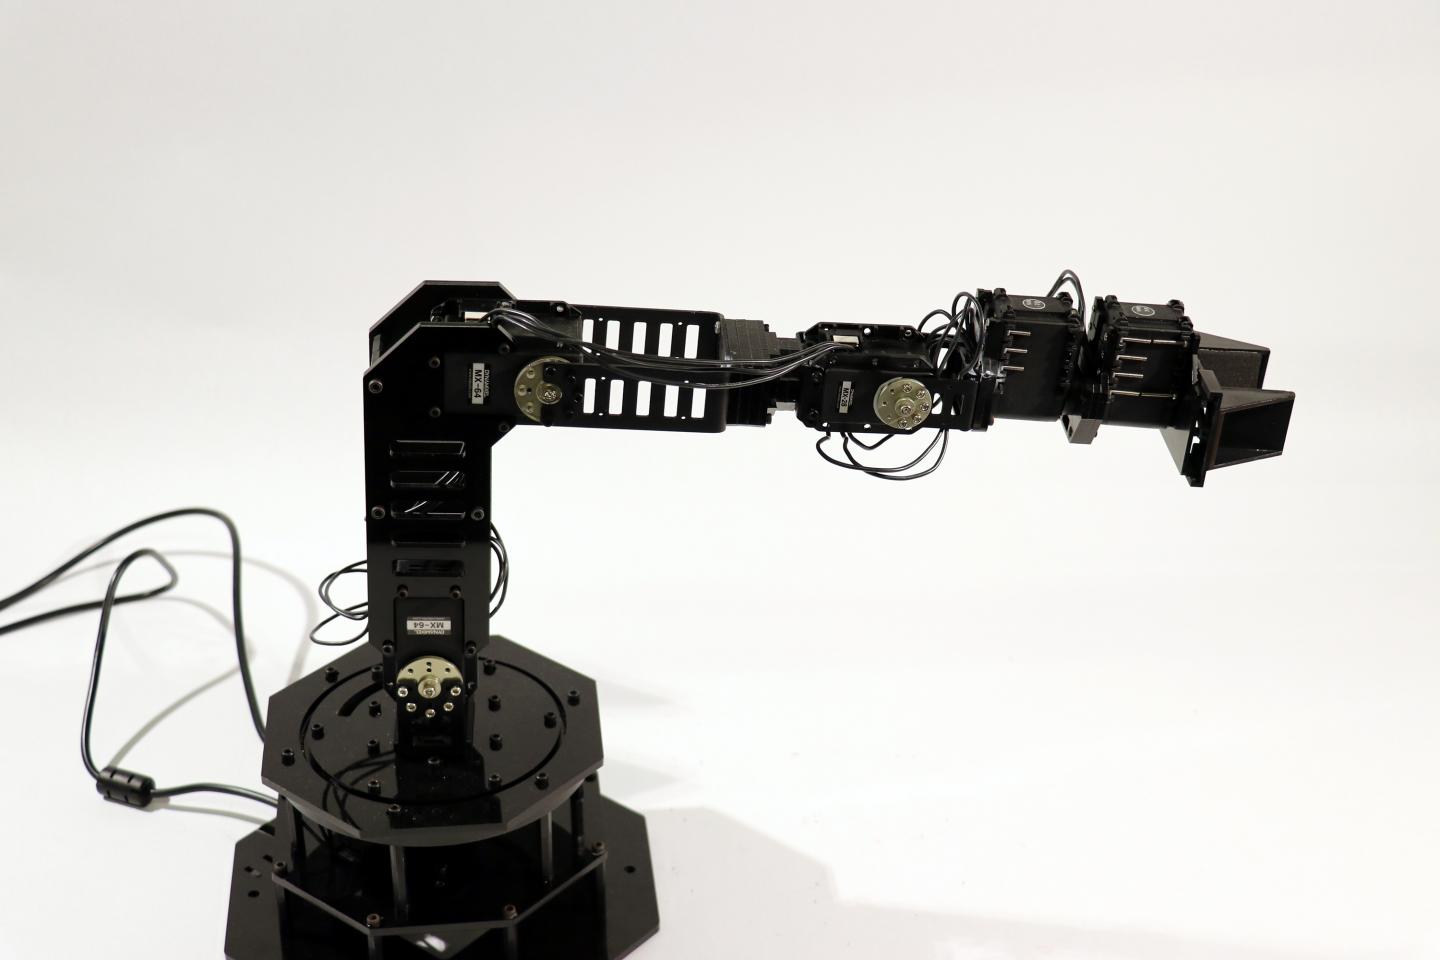 An Image of the Intact Robotic Arm